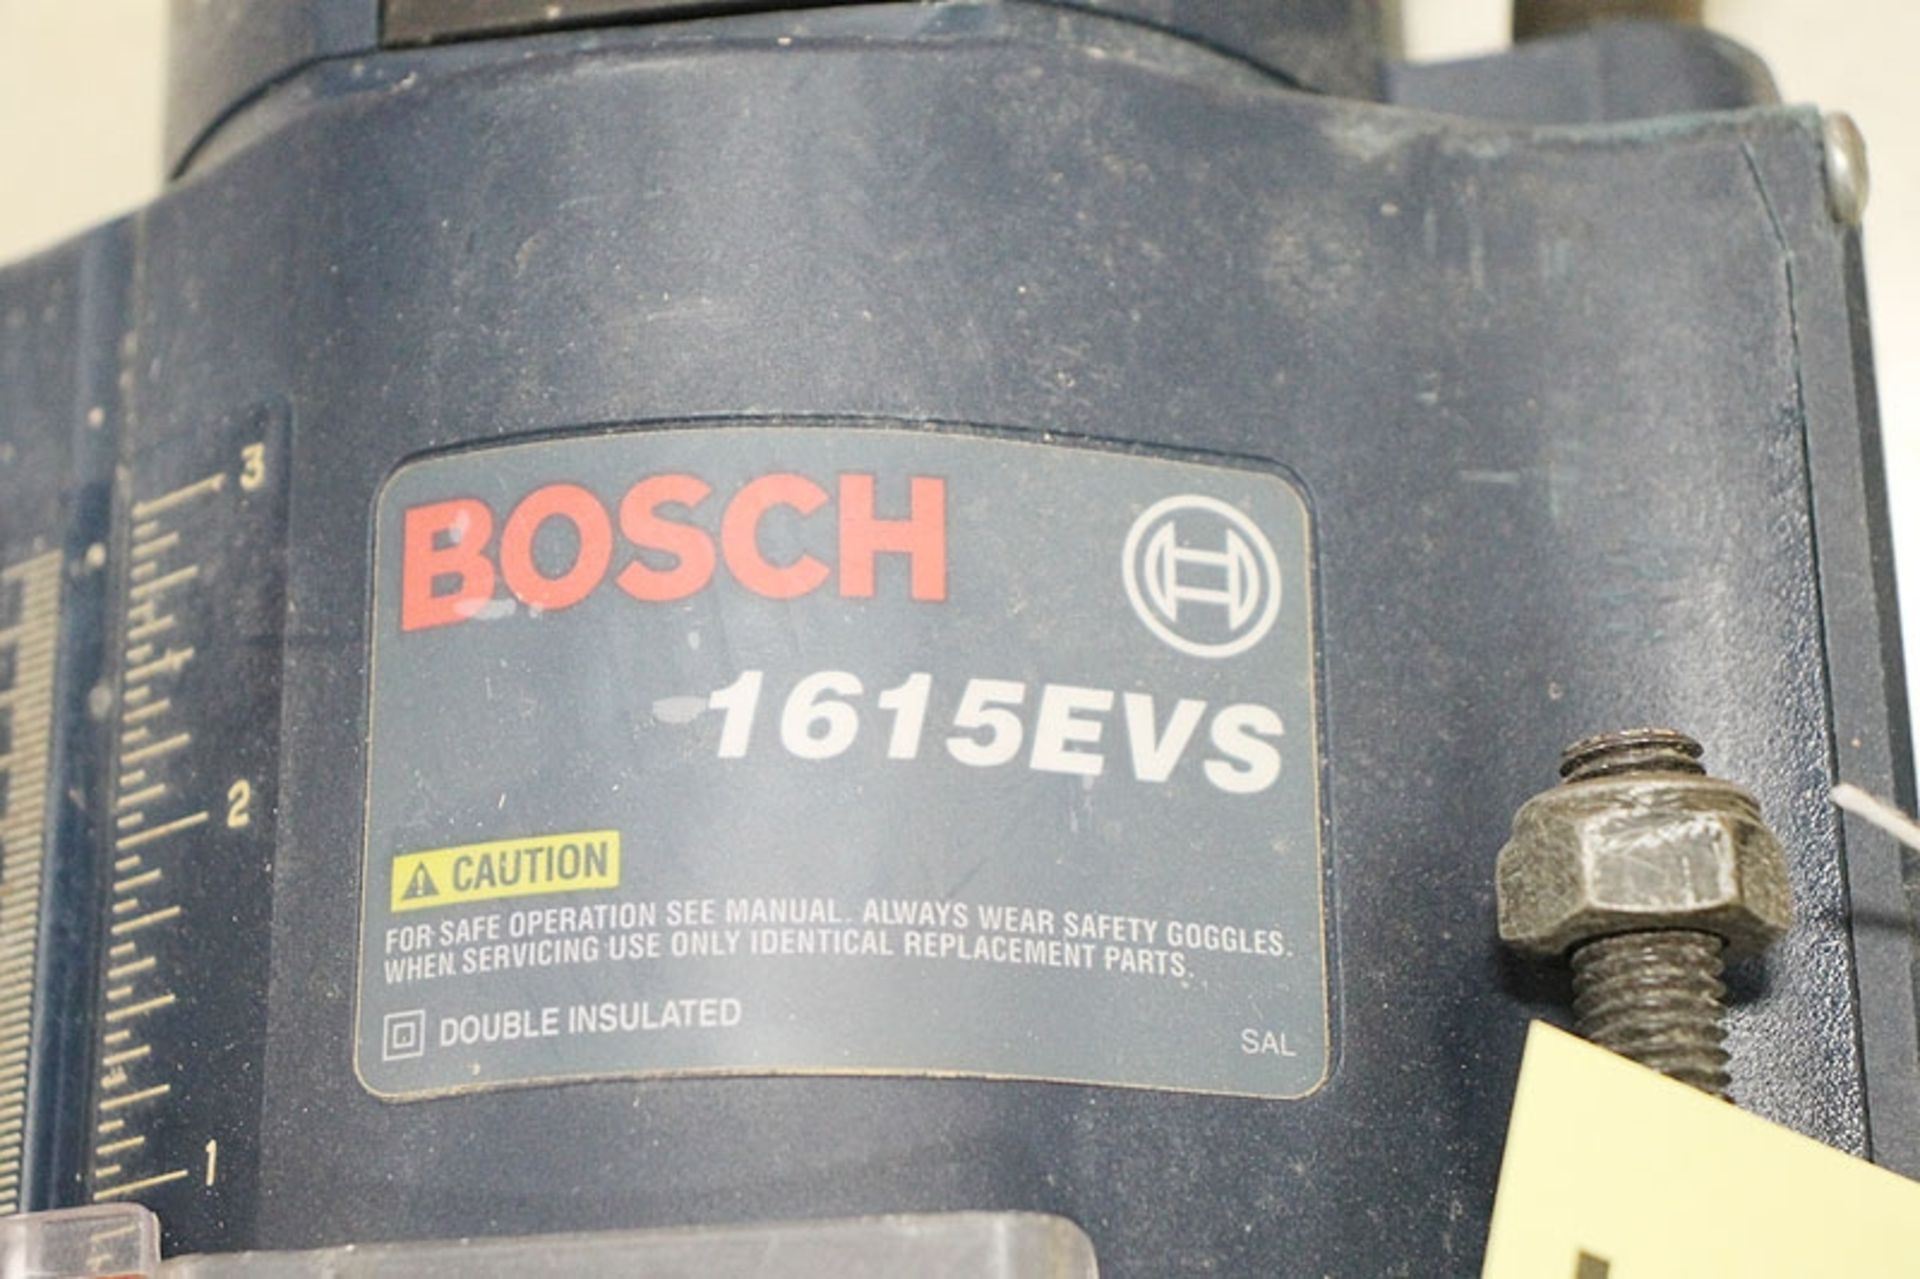 Bosch Type 1615EVS Router - Image 2 of 6